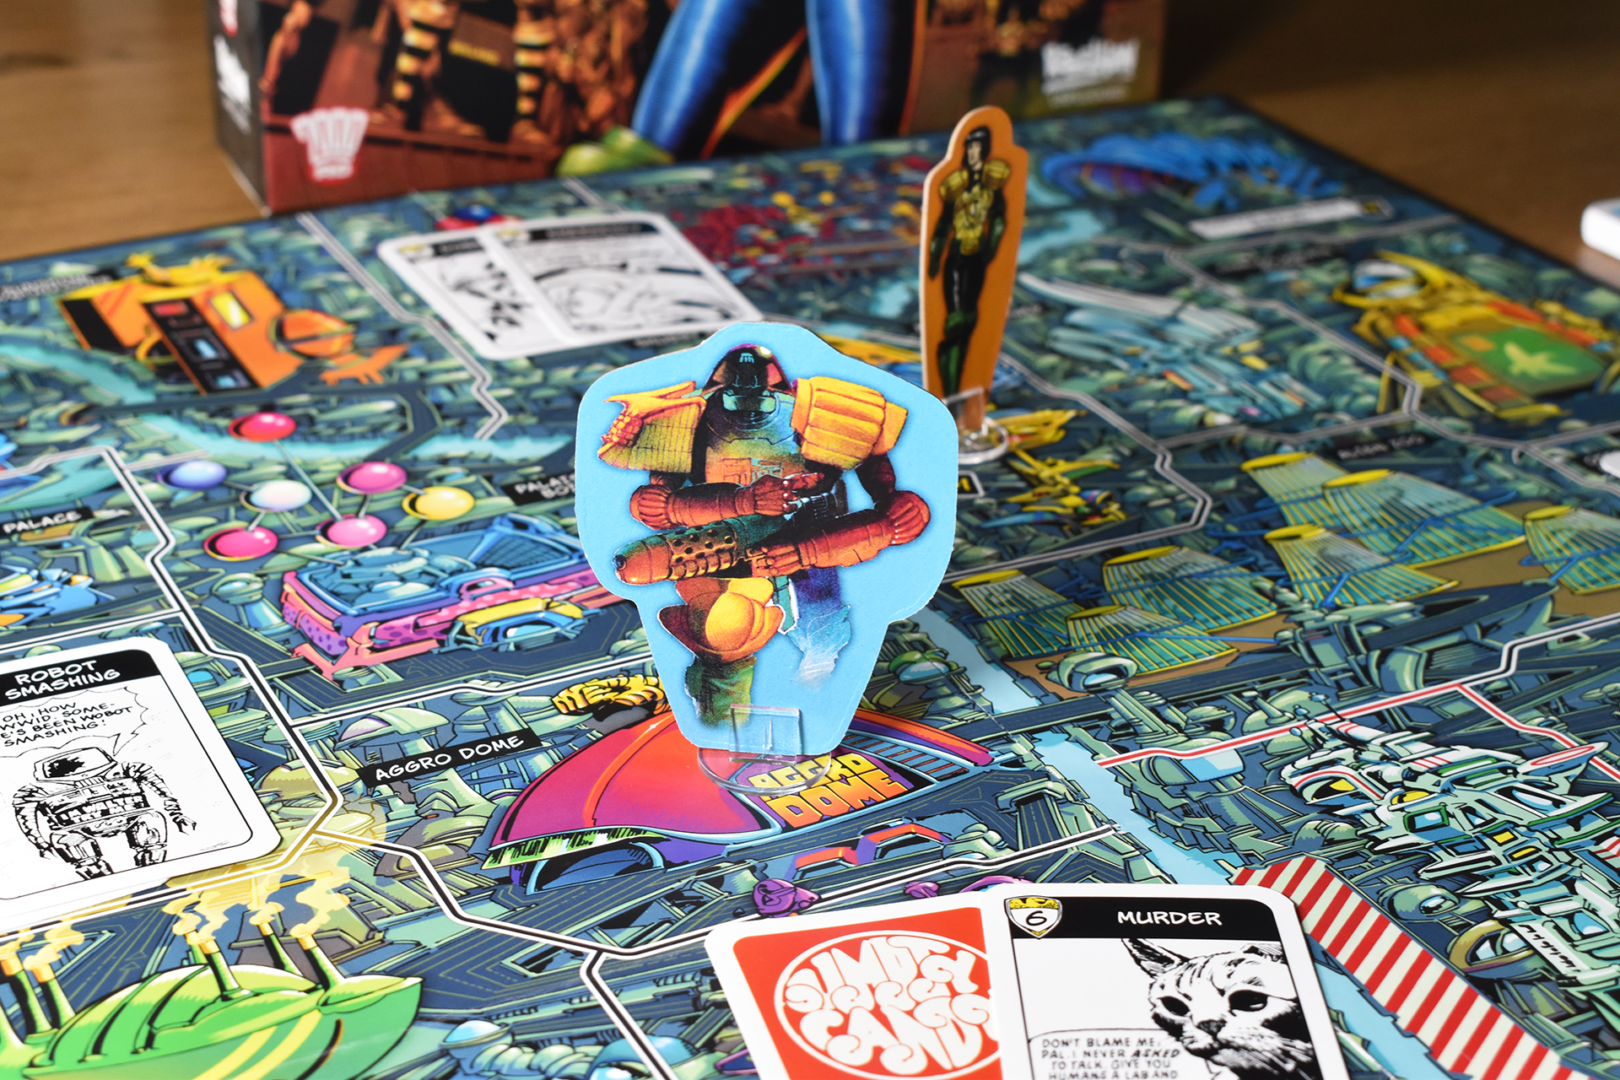 The Mechanismo standing on the board from Judge Dredd: The Game of Crime-Fighting in Mega-City One. In the background we can see another Judge, and Perp and Crime cards are placed around the board.